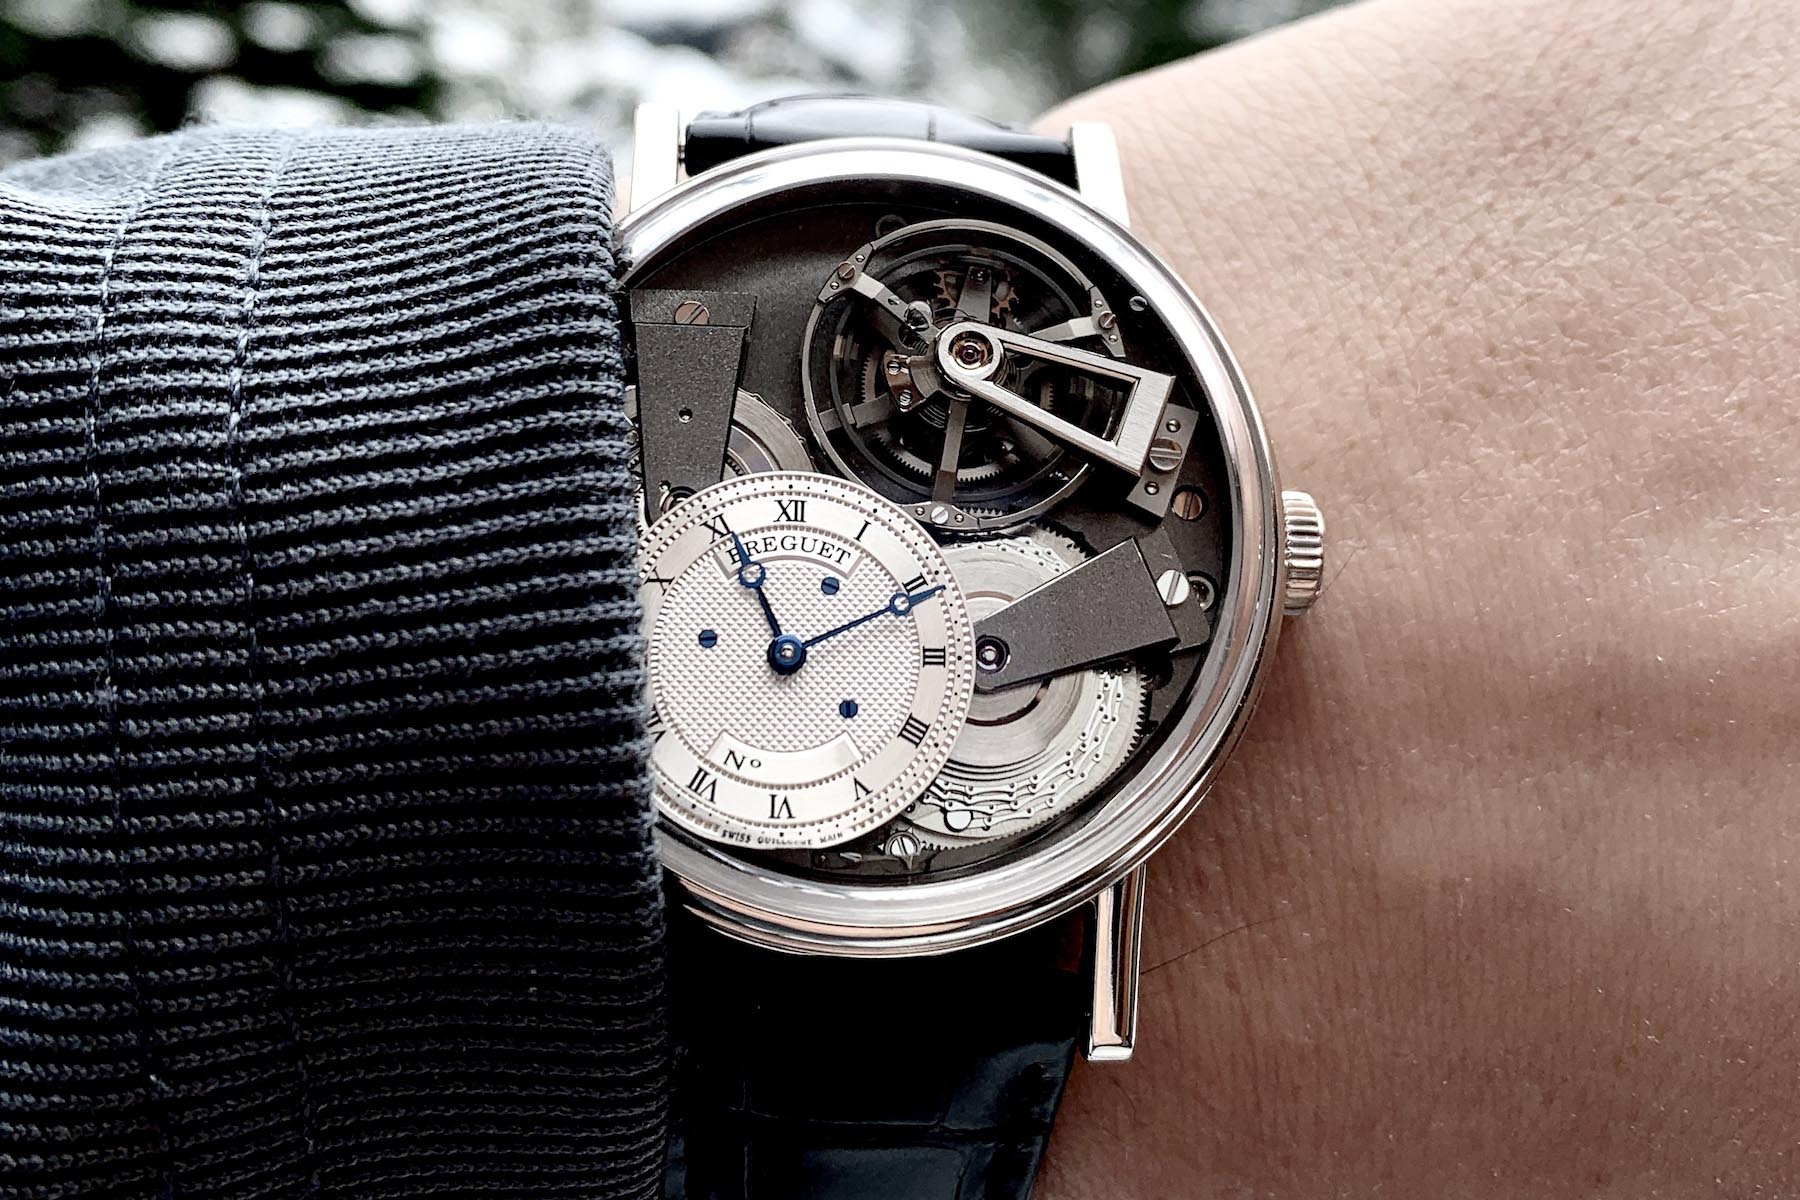 winewhiskywatches and his Breguet Tradition 7047 Grande Complication Fusee Tourbillon 